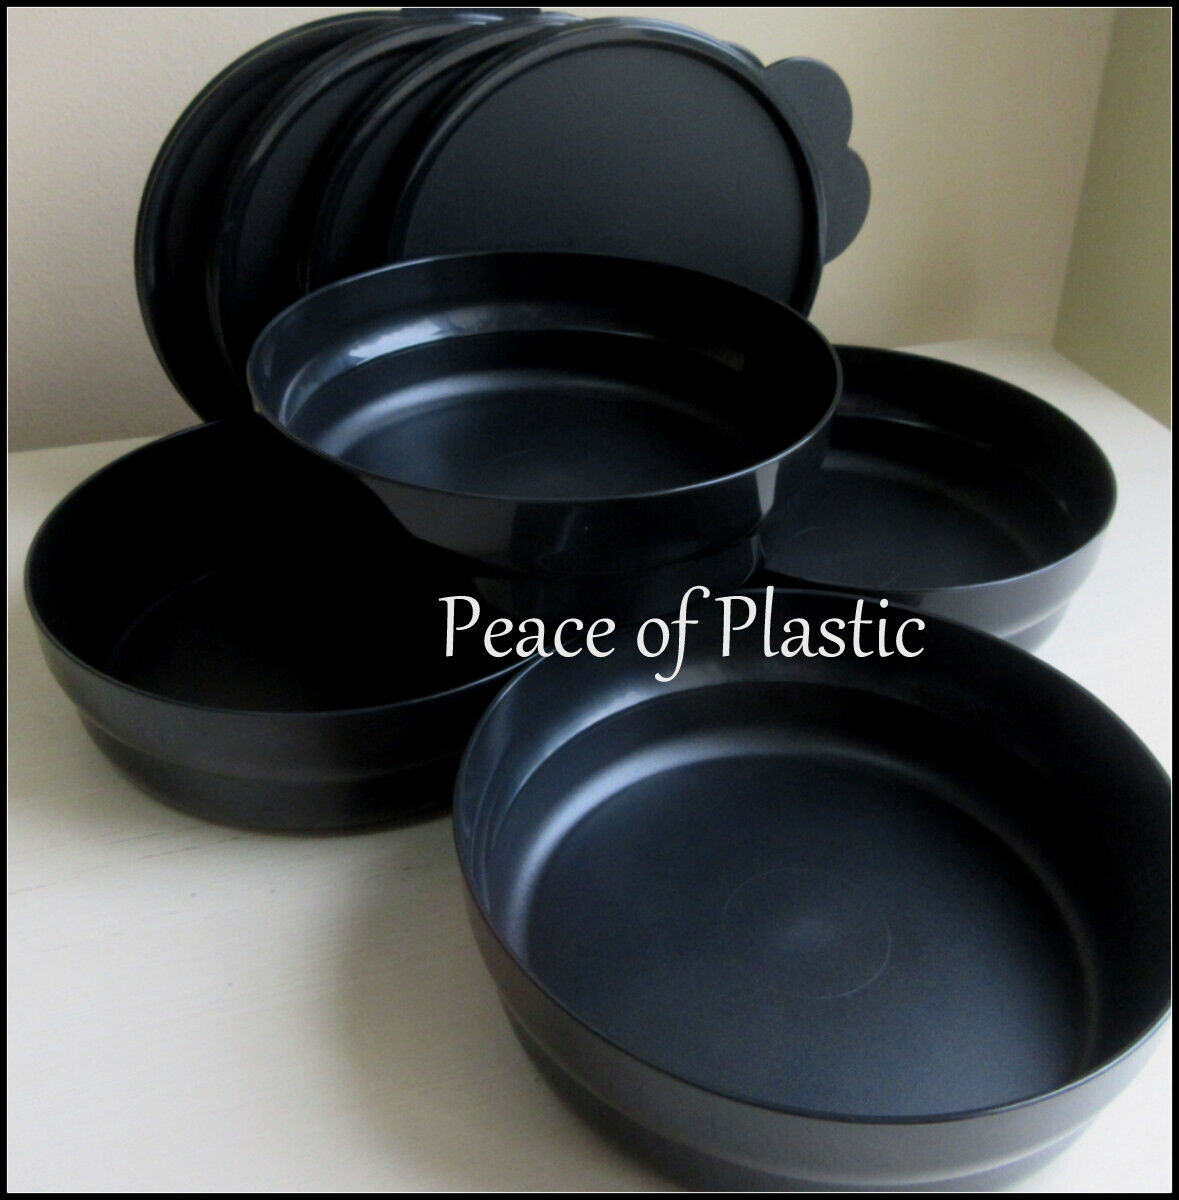 Tupperware NEW Impressions Black Microwavable Cereal Bowls with Seals Set of 4